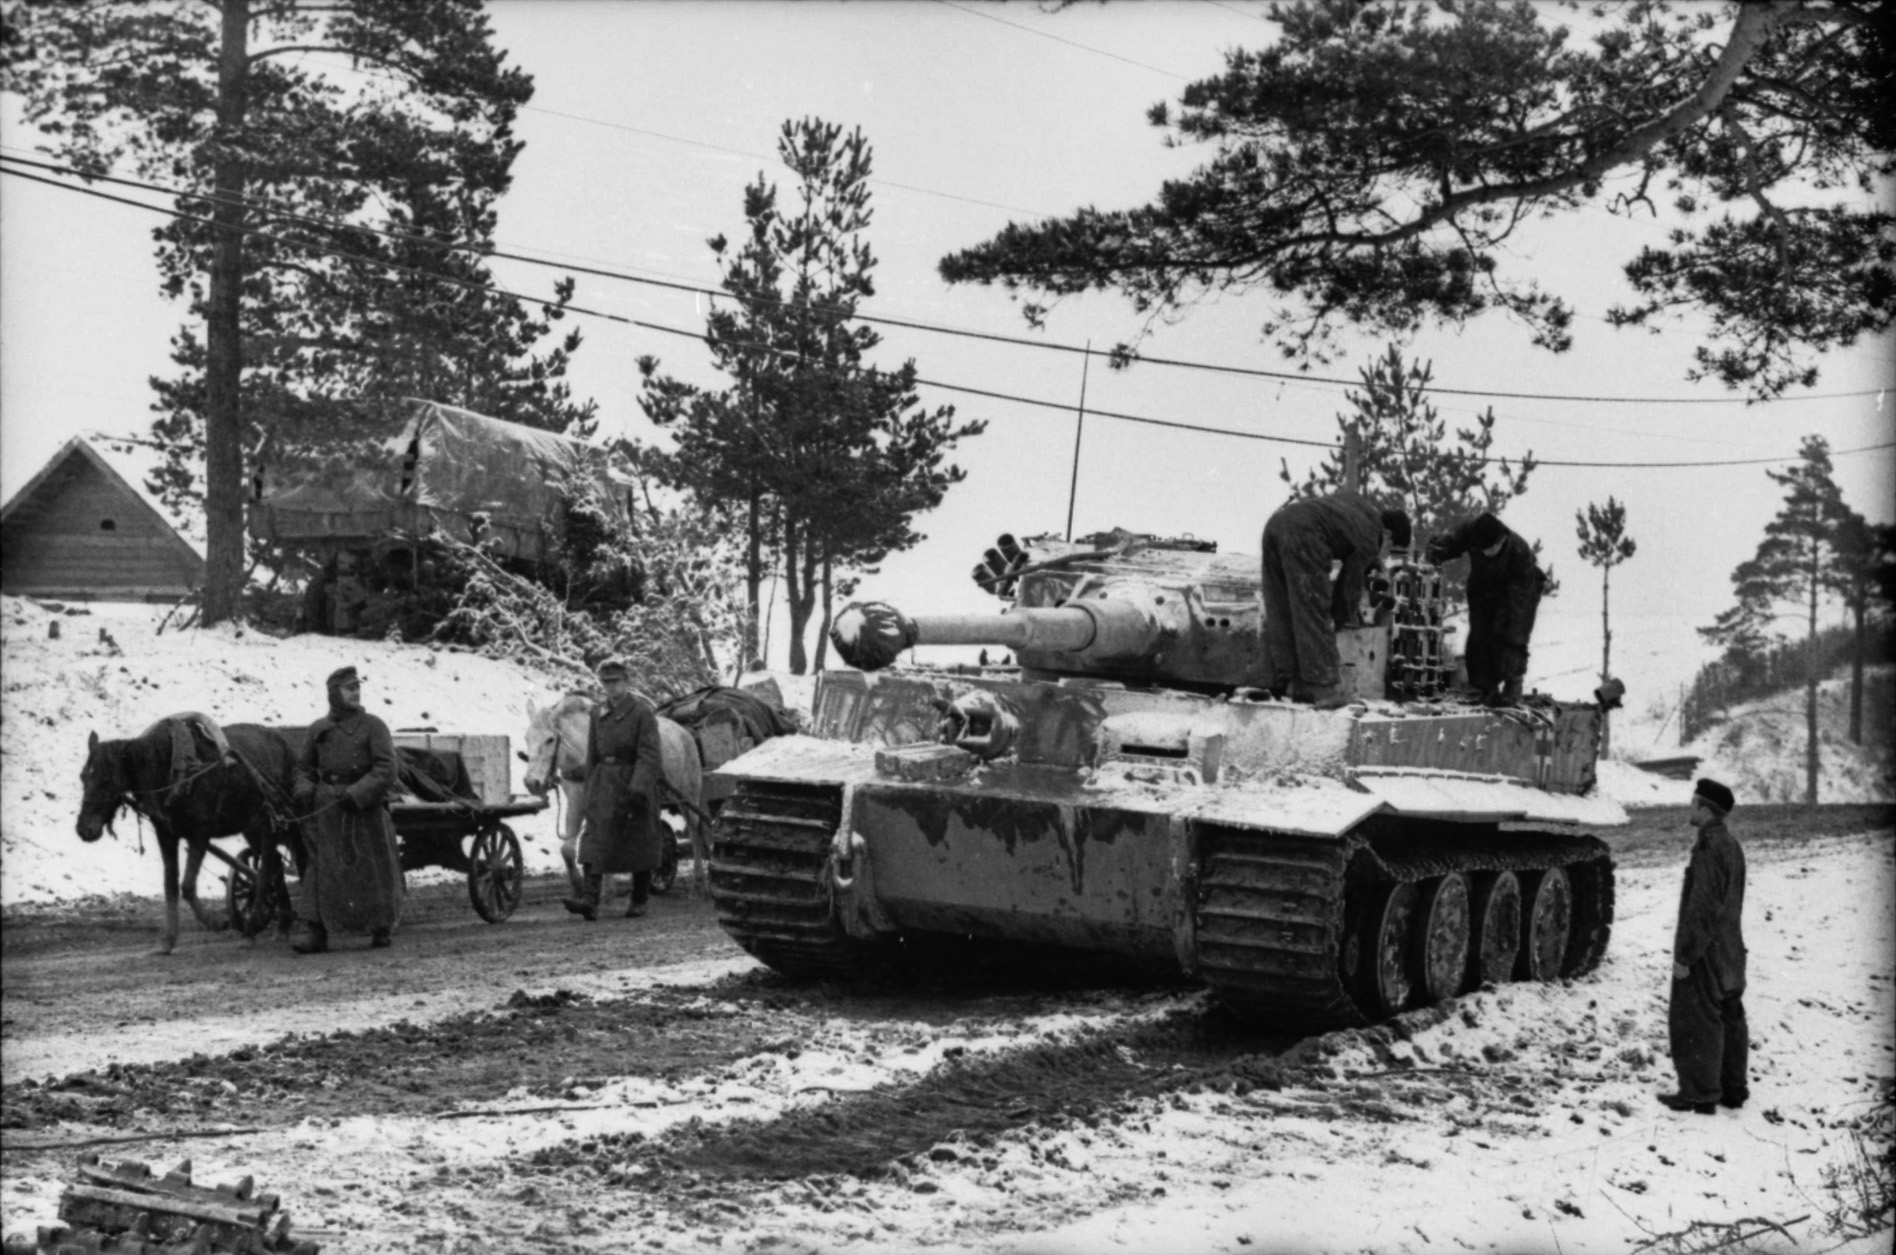 A German panzer crew works on its Tiger I during the long Russian winter as German infantry marches past with a horse-drawn vehicle. By the war's end more than one million horses were still hauling German personnel, artillery, and ammunition.